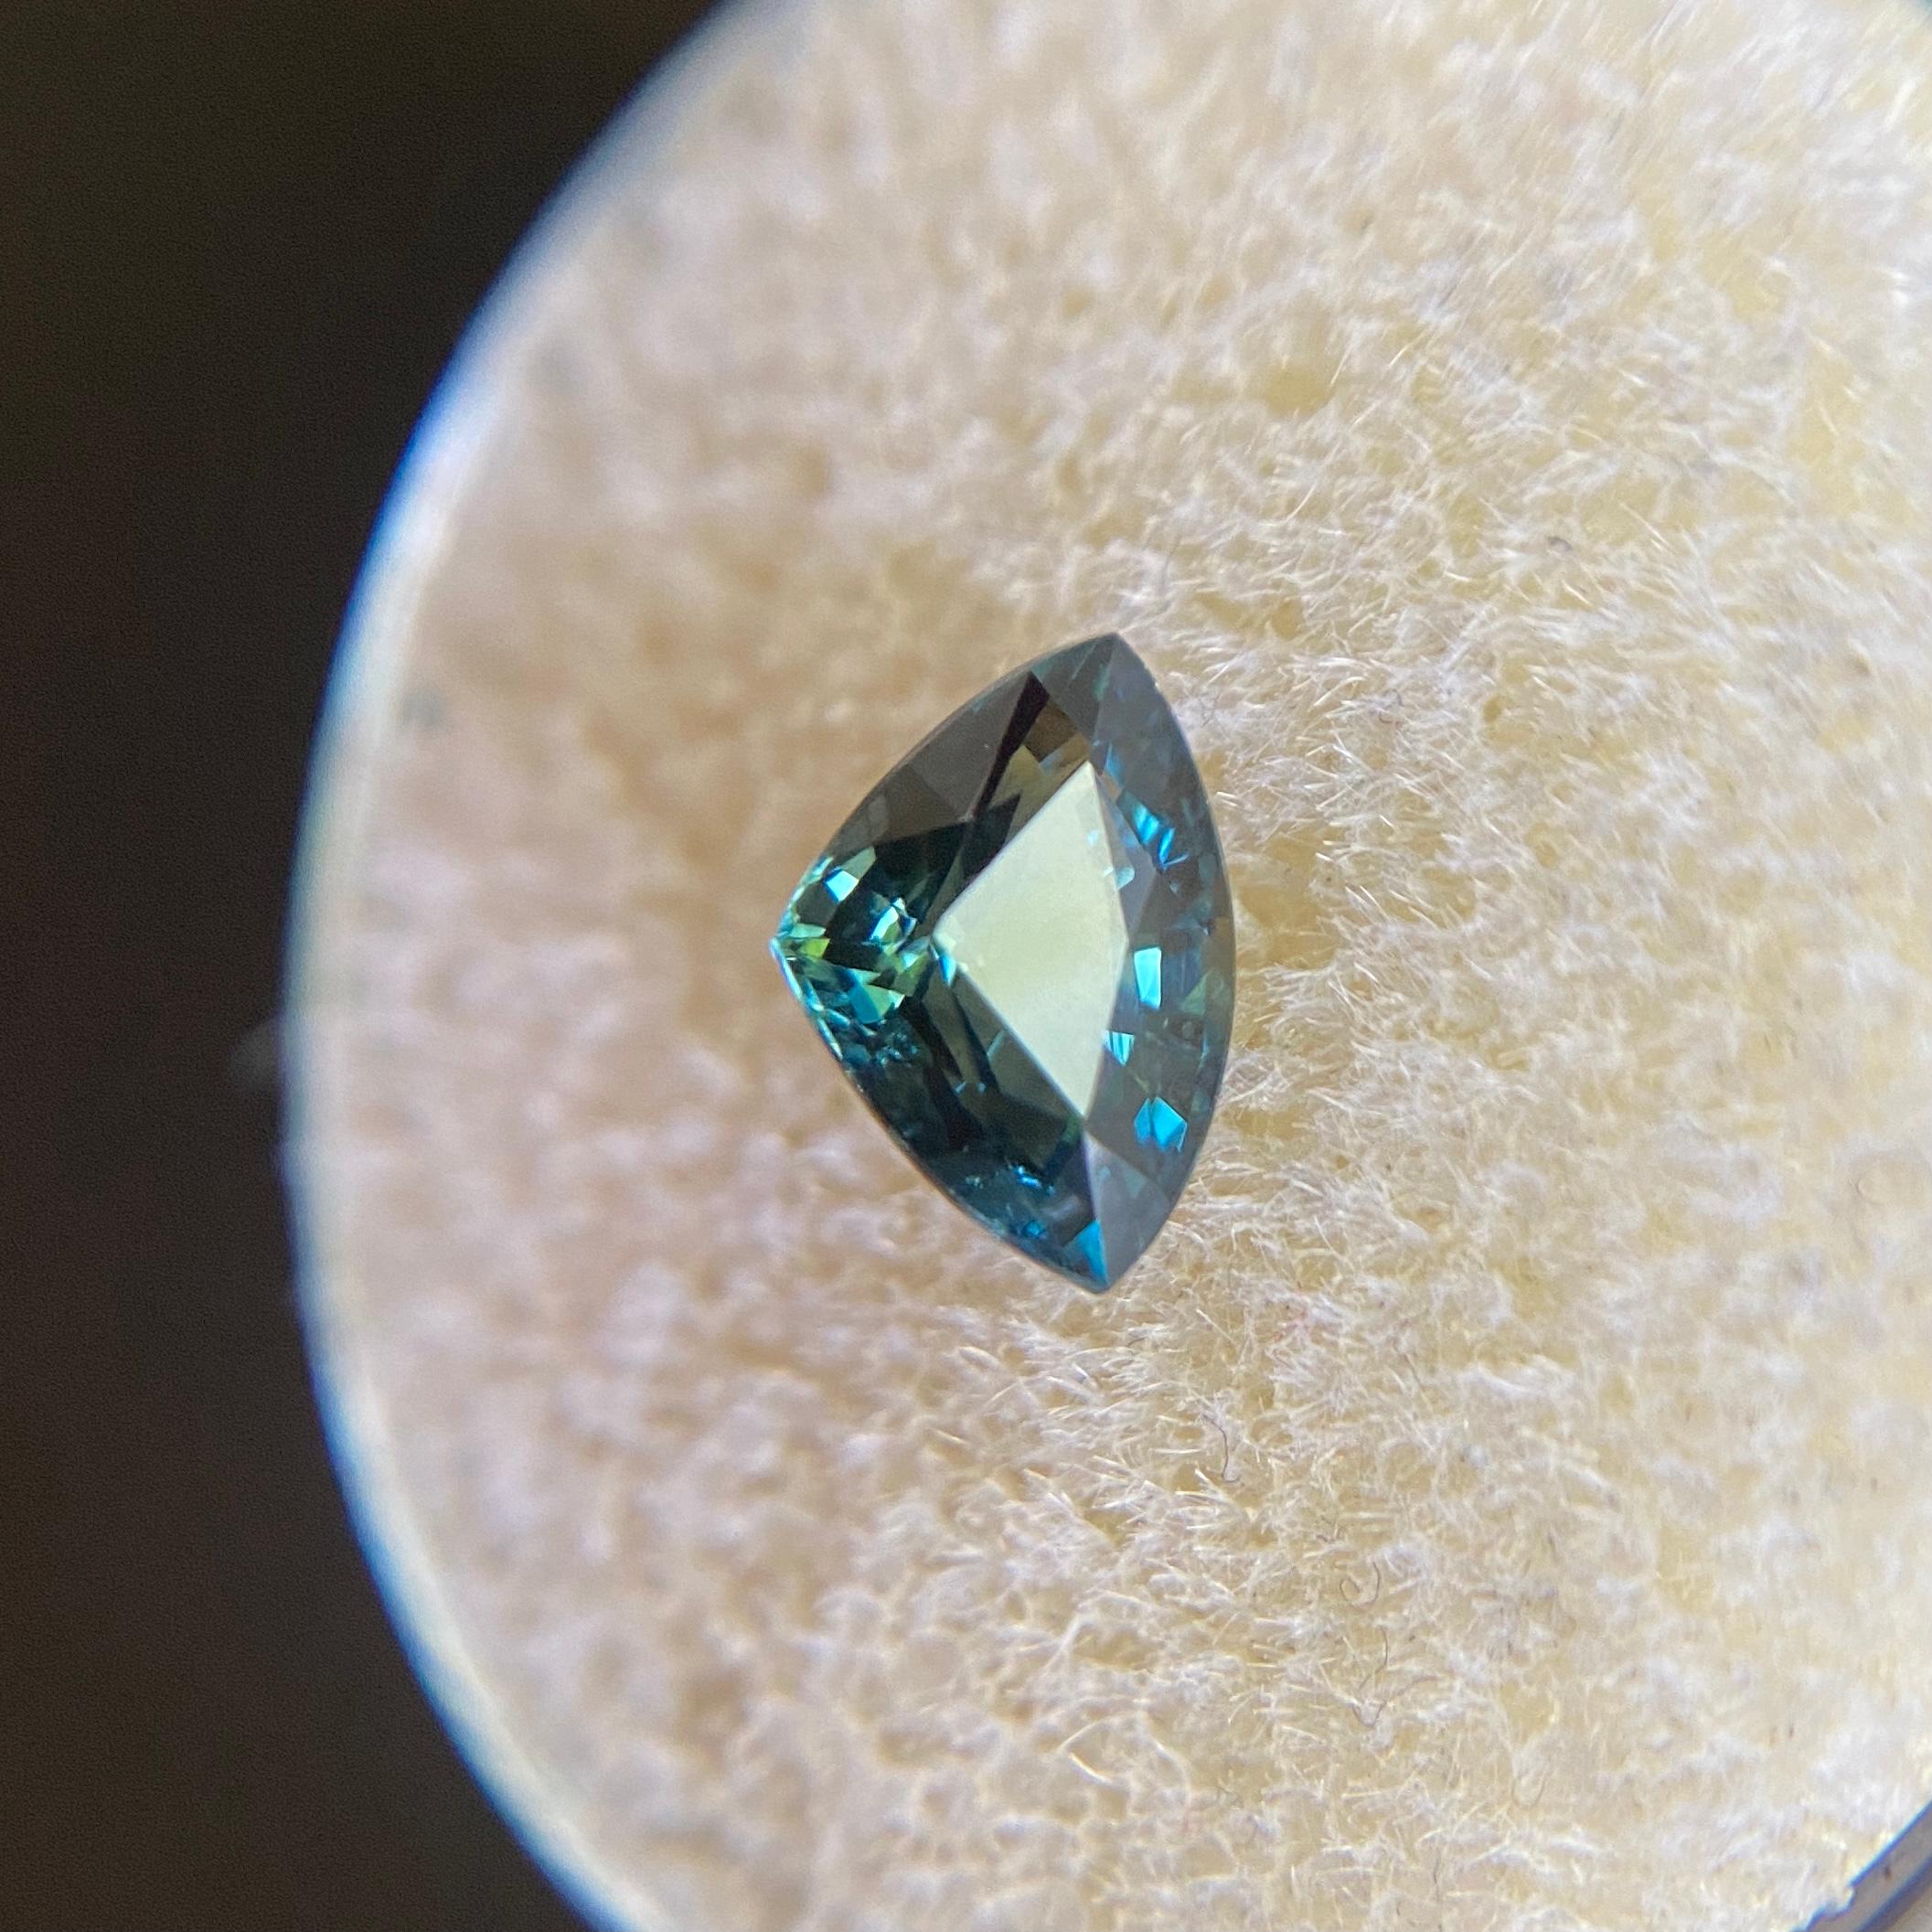 Natural Deep Blue Sapphire Gemstone.

1.24 Carat with a beautiful deep greenish blue colour and very good clarity, a clean stone with only some small natural inclusions visible when looking closely. No breaks or cracks.

Also has an excellent cut